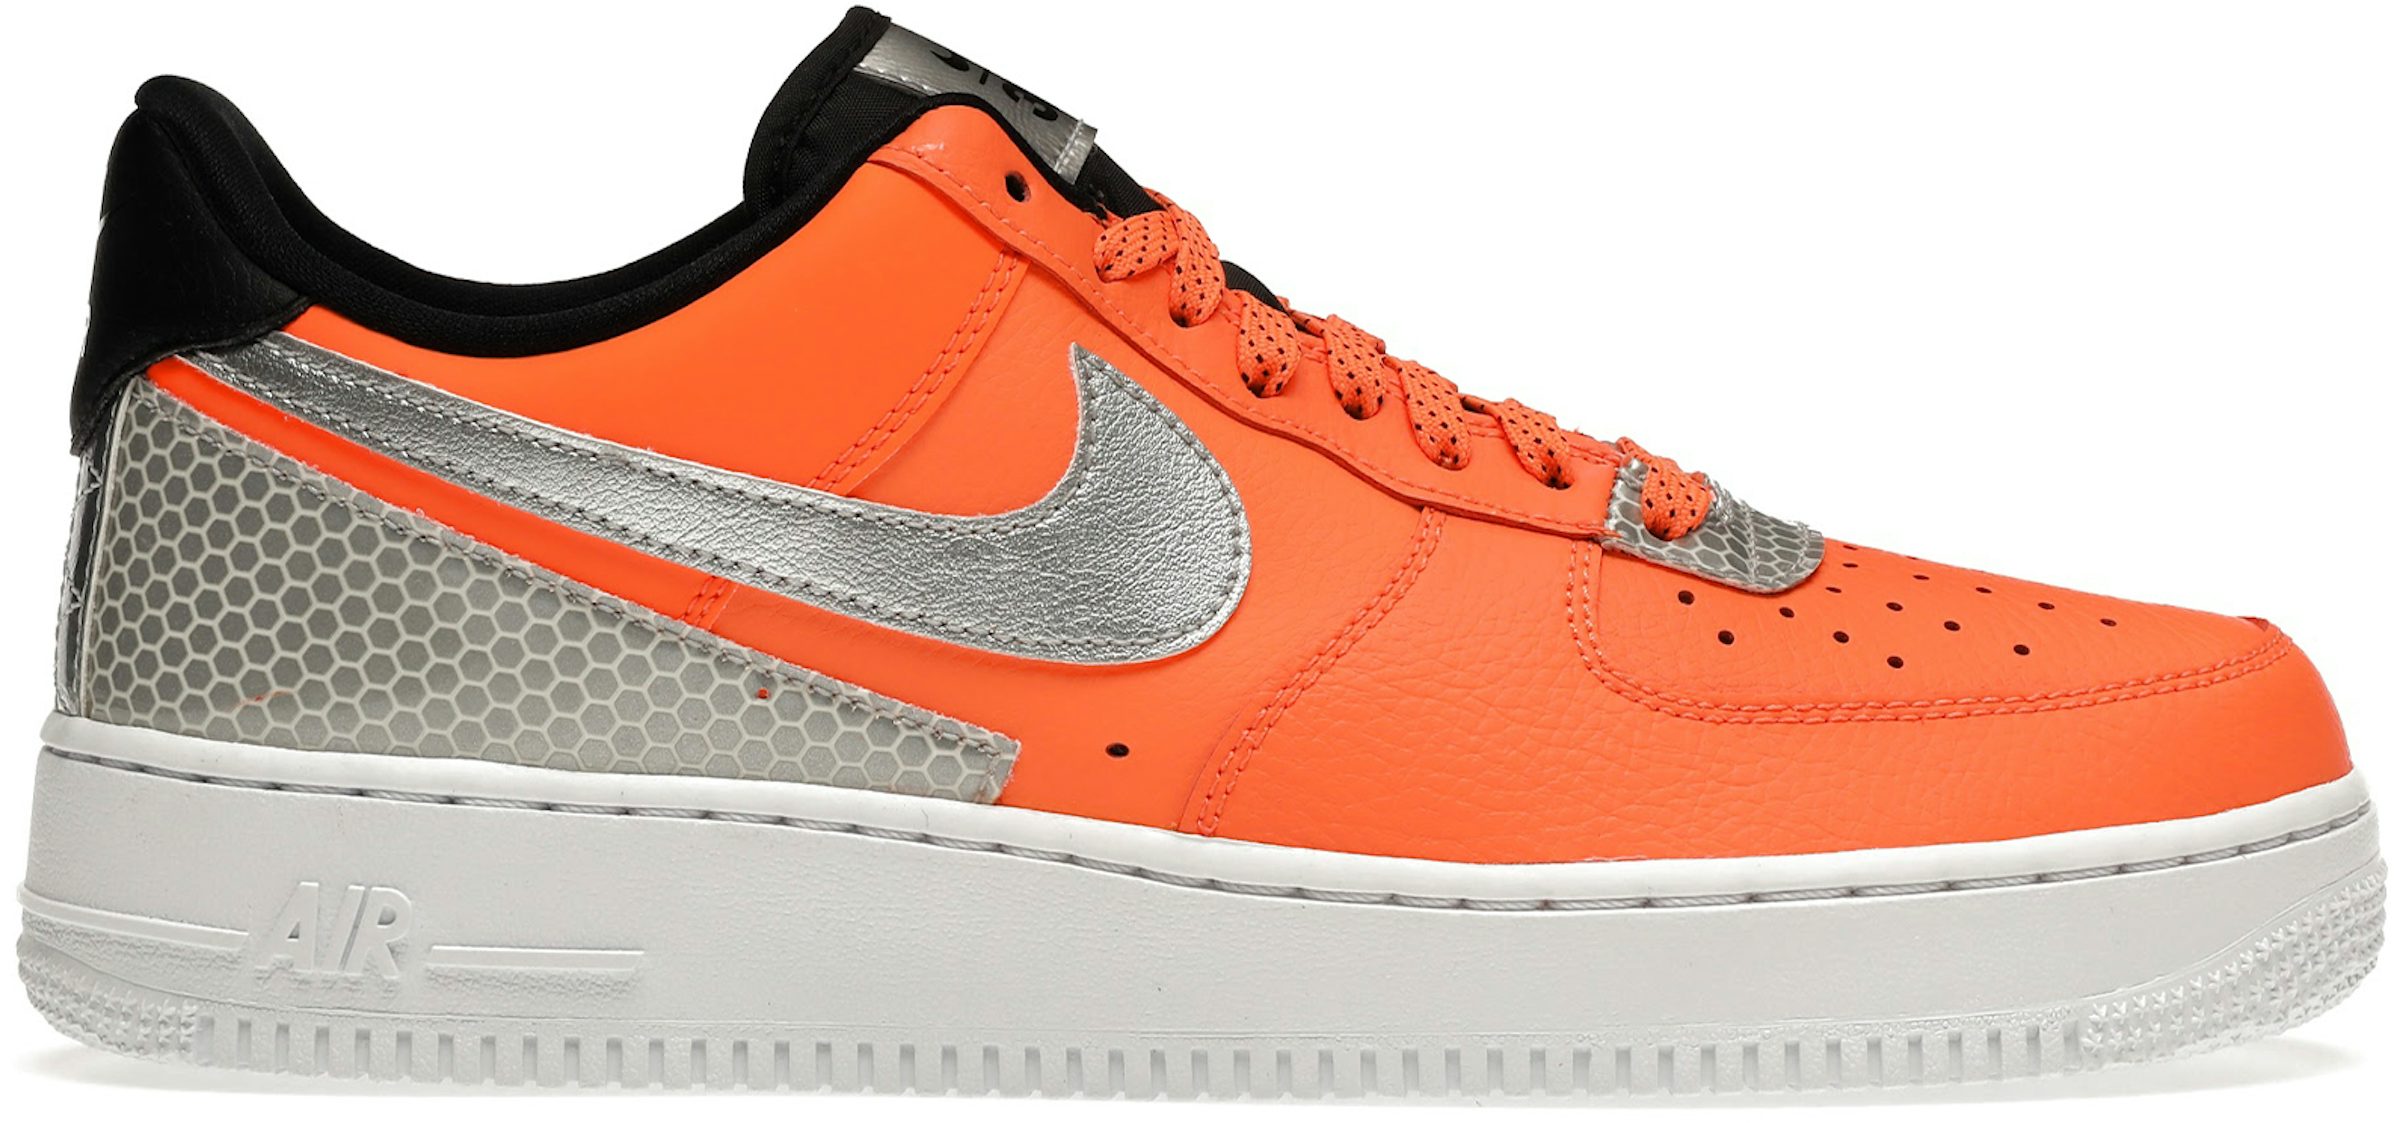 Undefeated x Nike Air Force 1 Low 'Total Orange' 8